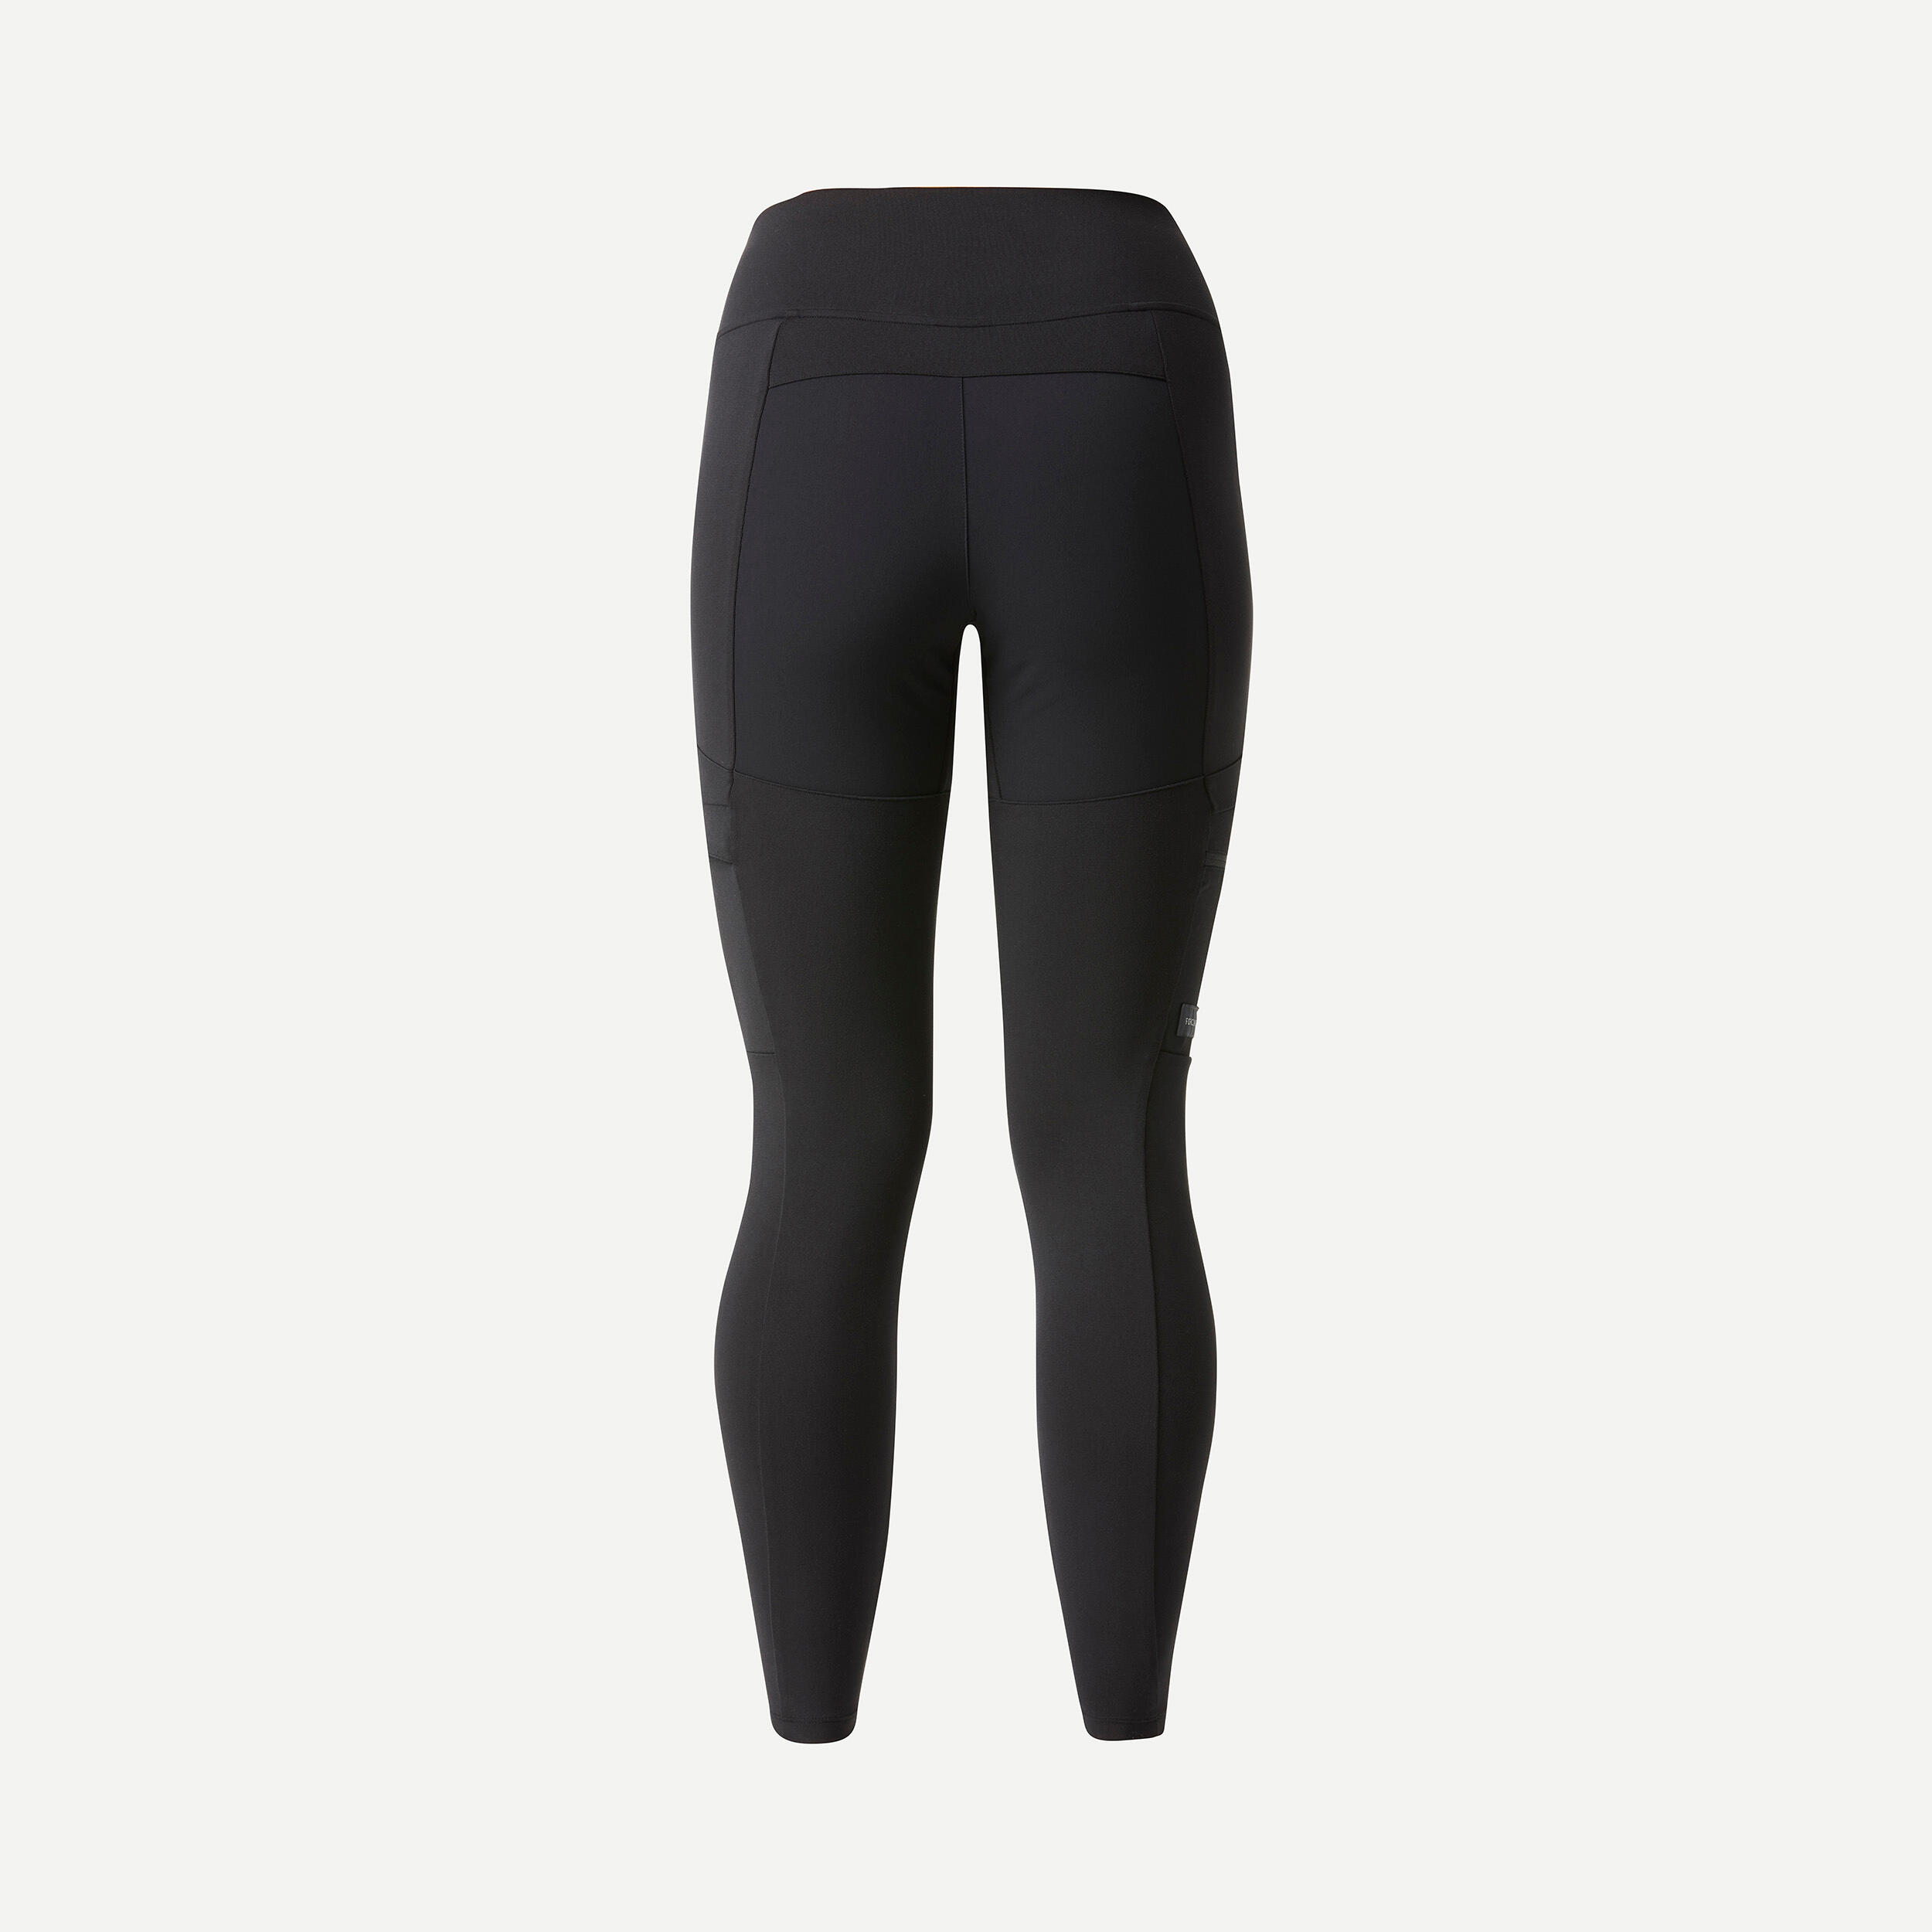 Avalanche Outdoor Supply Comp. women's hiking/workout leggings, black, small